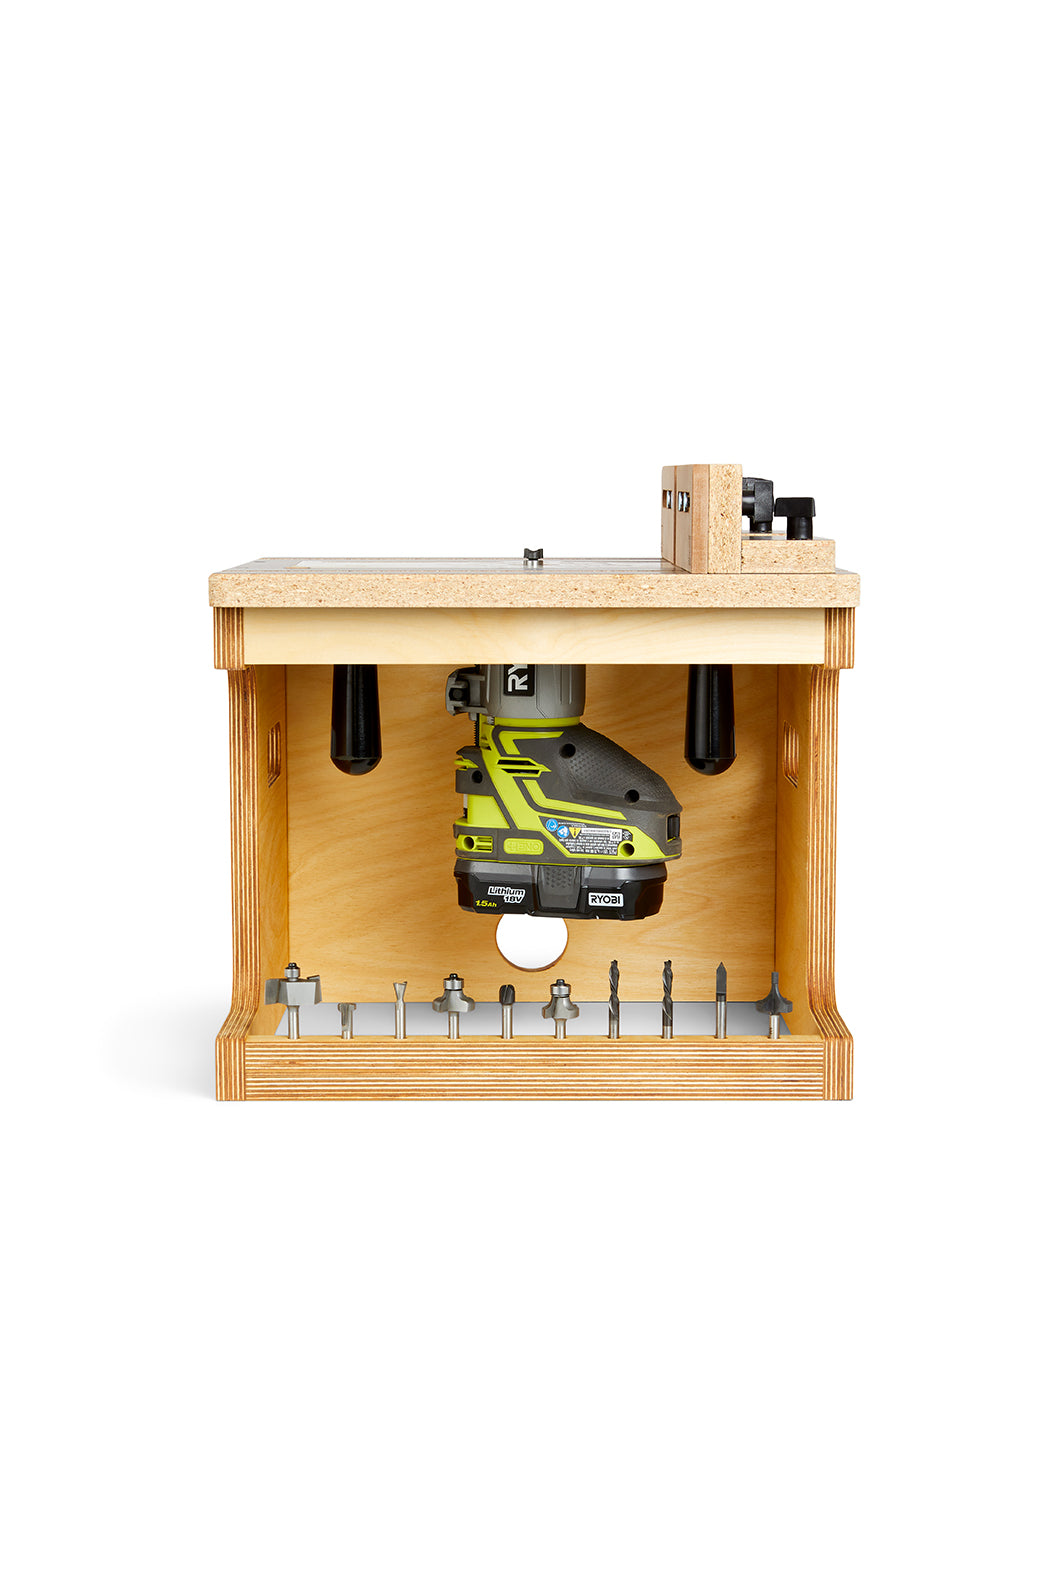 Bench-mounted Router Table Woodworking Plan